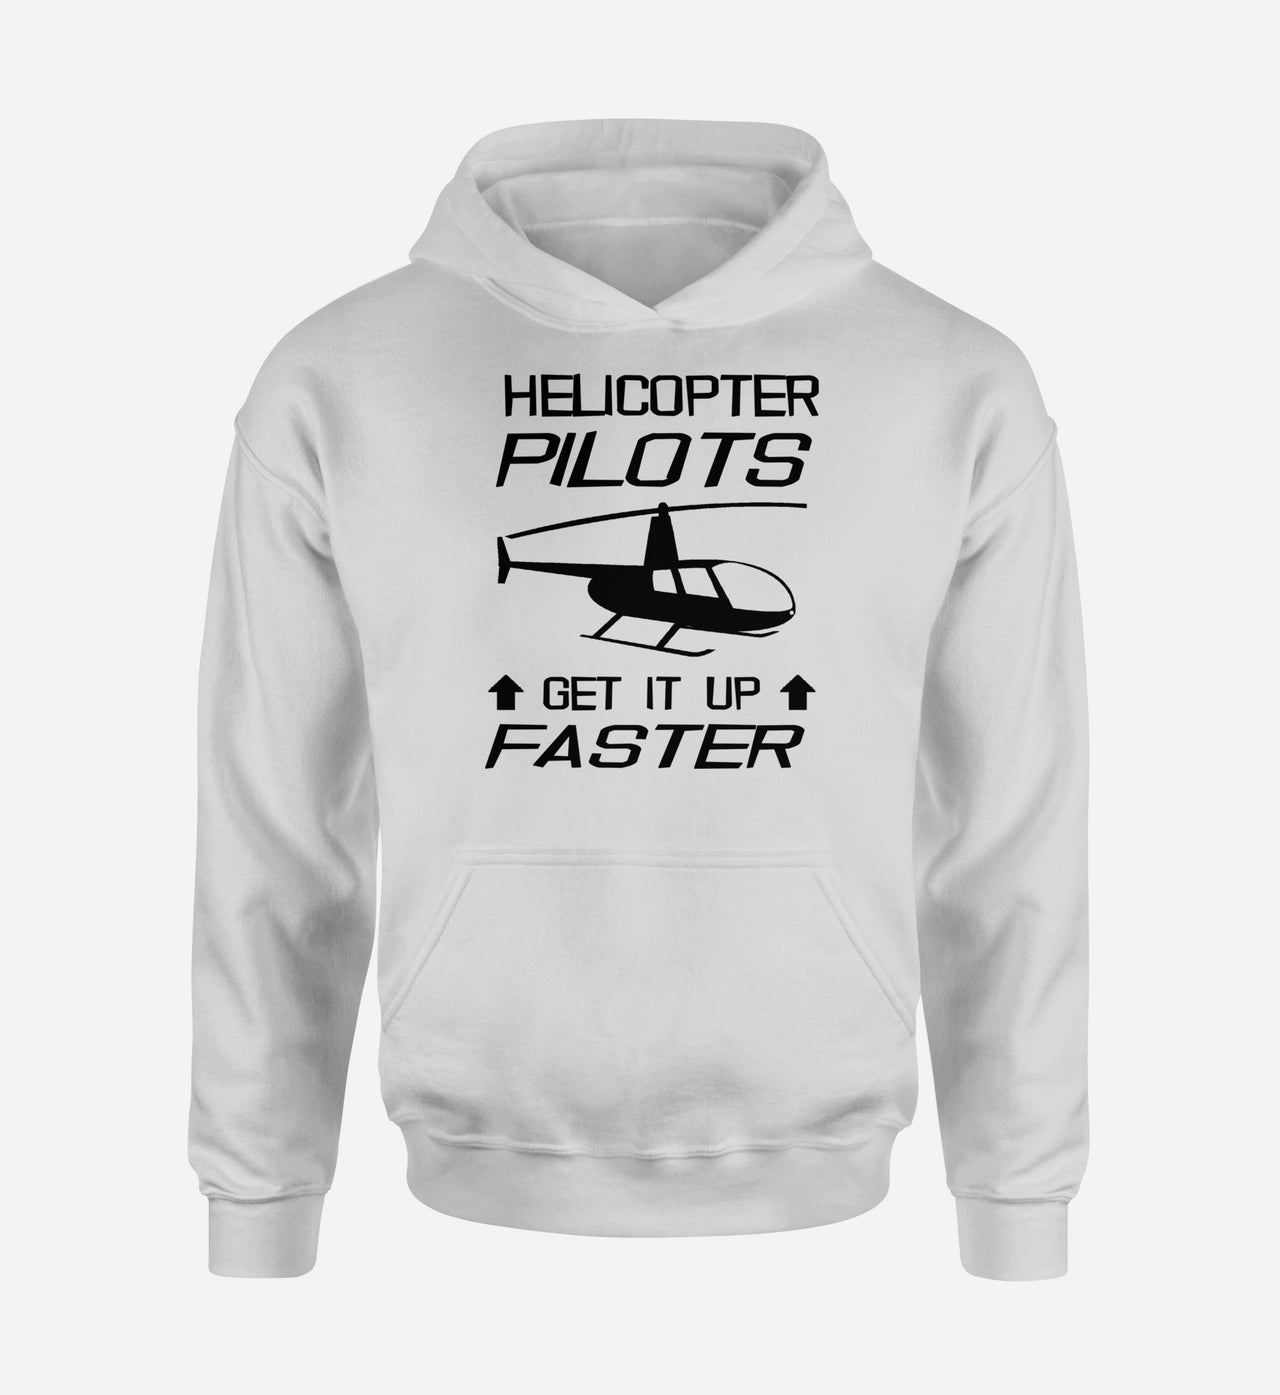 Helicopter Pilots Get It Up Faster Designed Hoodies